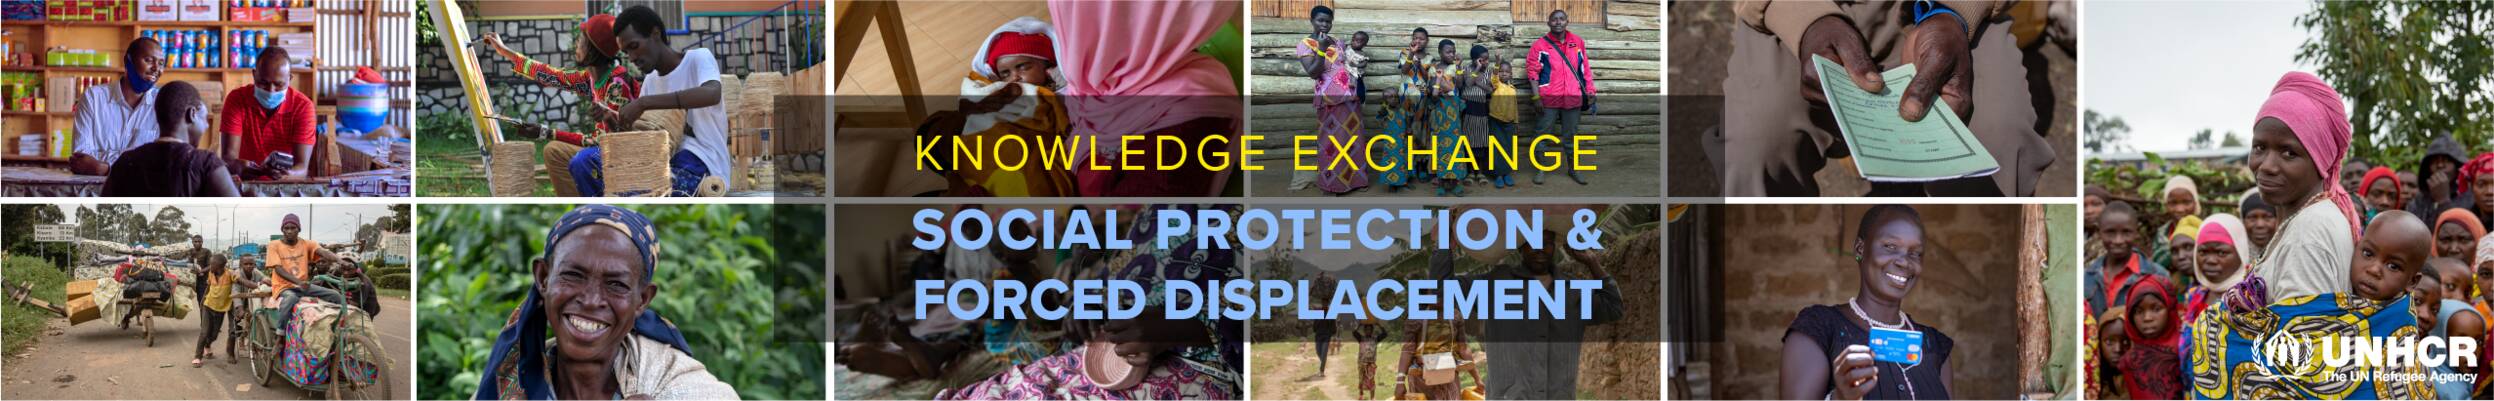 Knowledge Exchange Social Protection & Forced Displacement